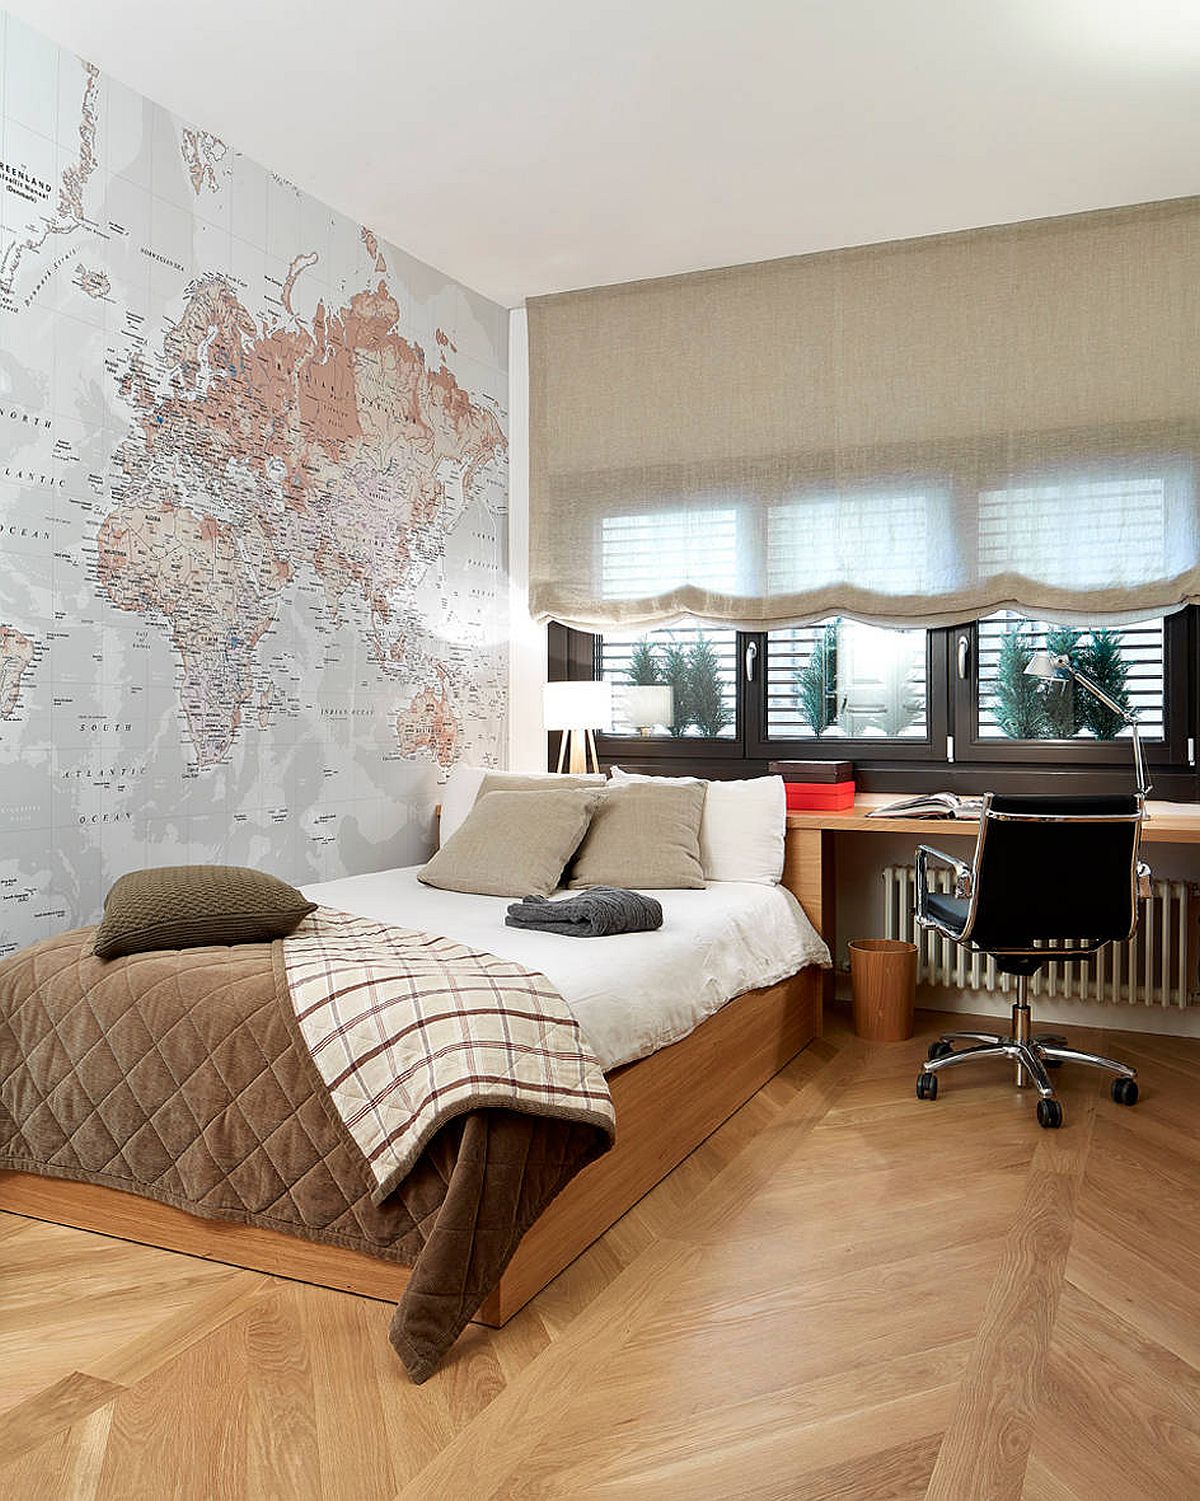 Space-savvy-modern-bedroom-where-the-map-on-the-wall-becomes-the-focal-point-21604